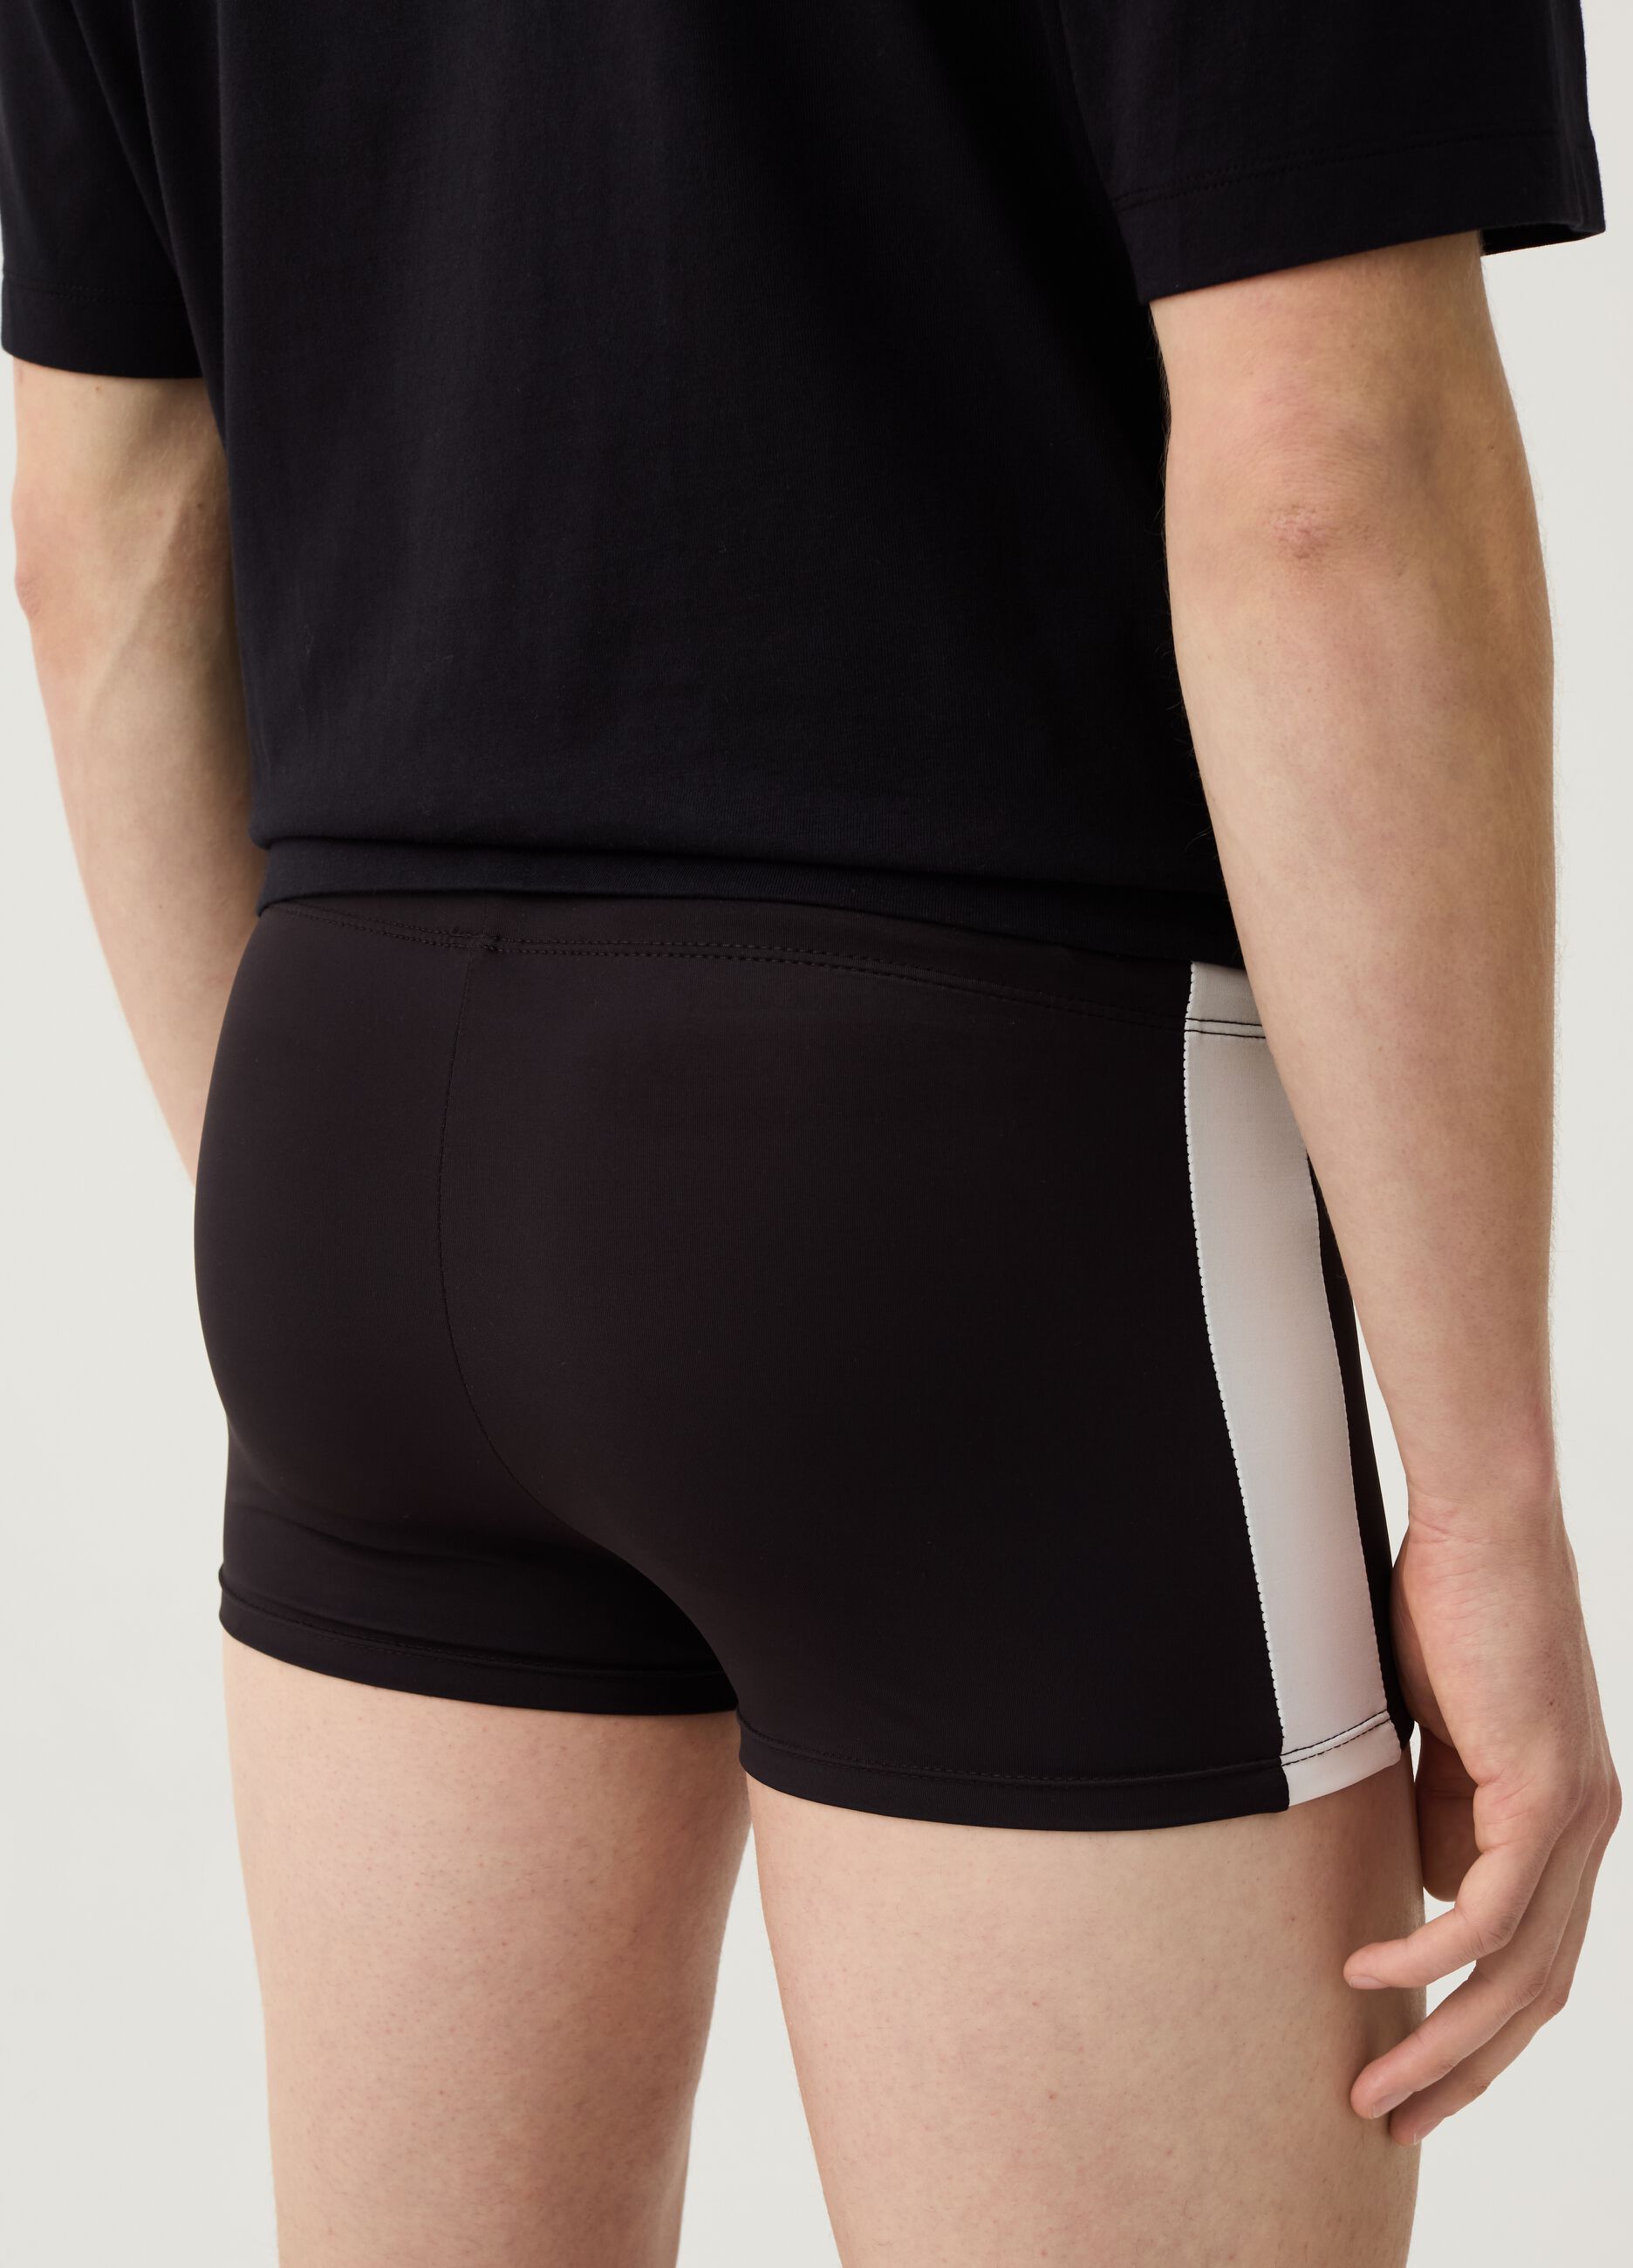 Swimming trunks with side bands